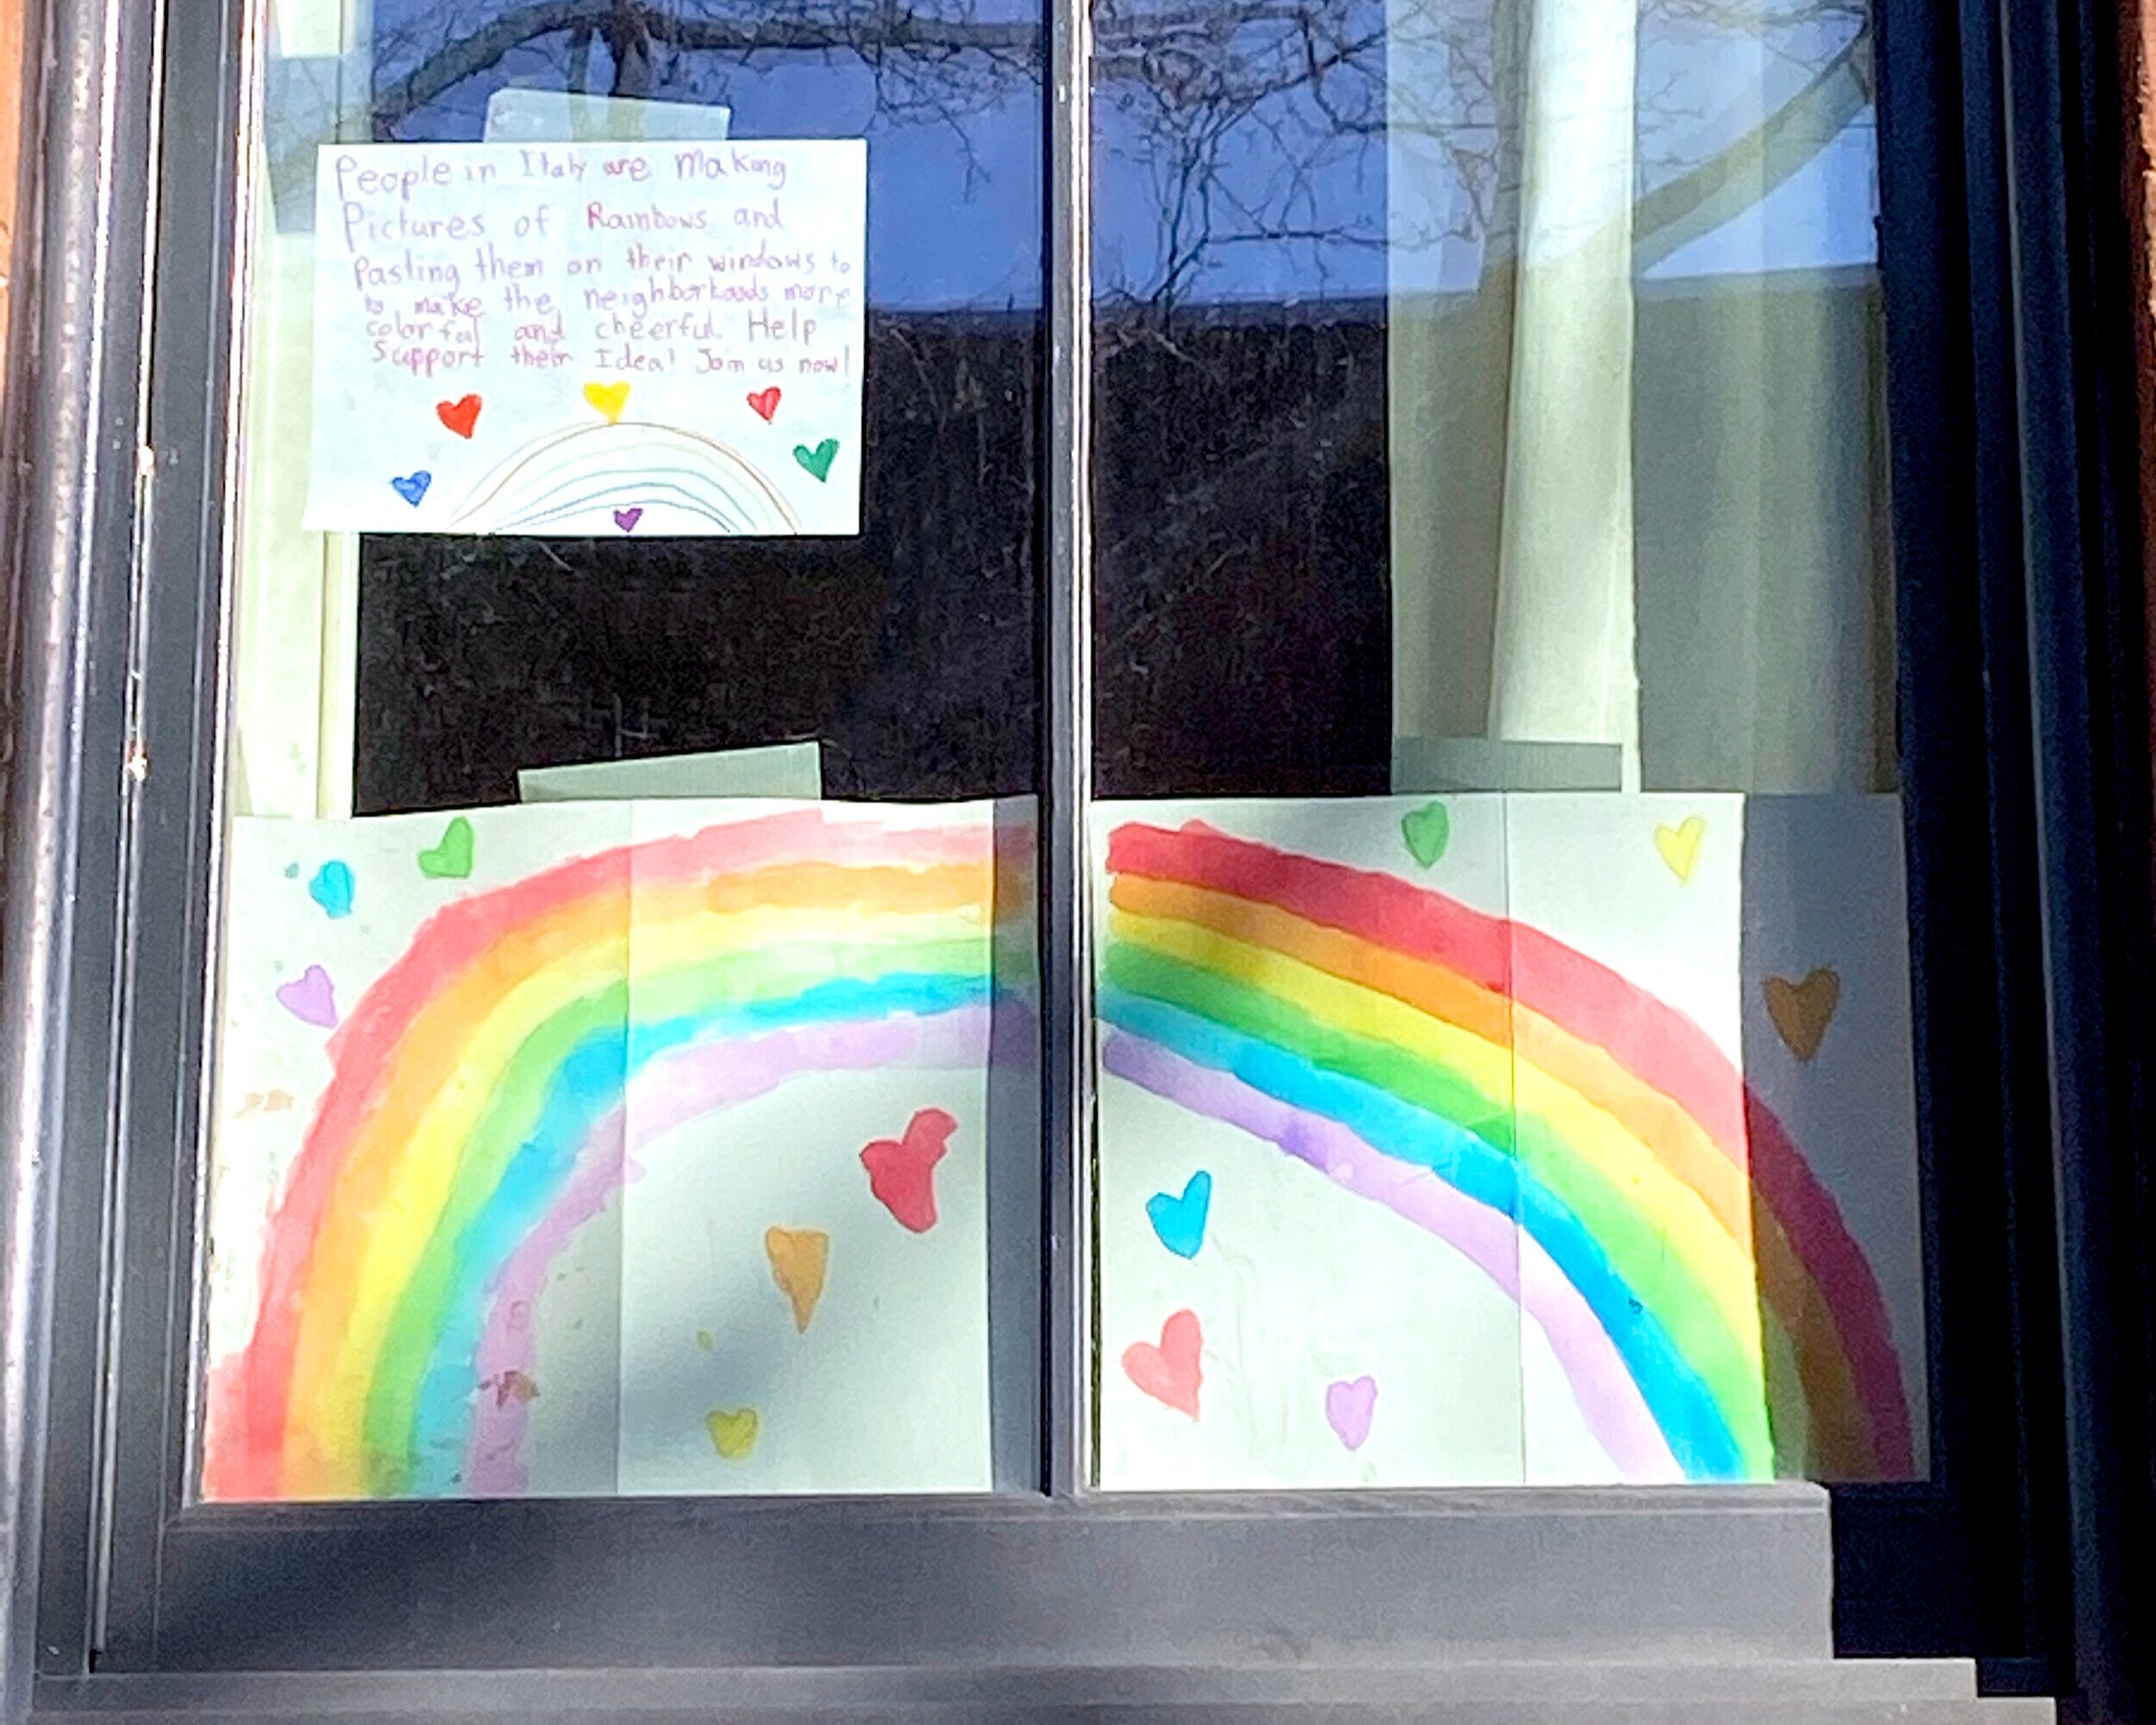 Child's hand-painted rainbow and heart artwork hanging in window with note that says "People in Italy are making pictures of rainbows and pasting them on their windows to make the neighborhoods more colorful and cheerful.